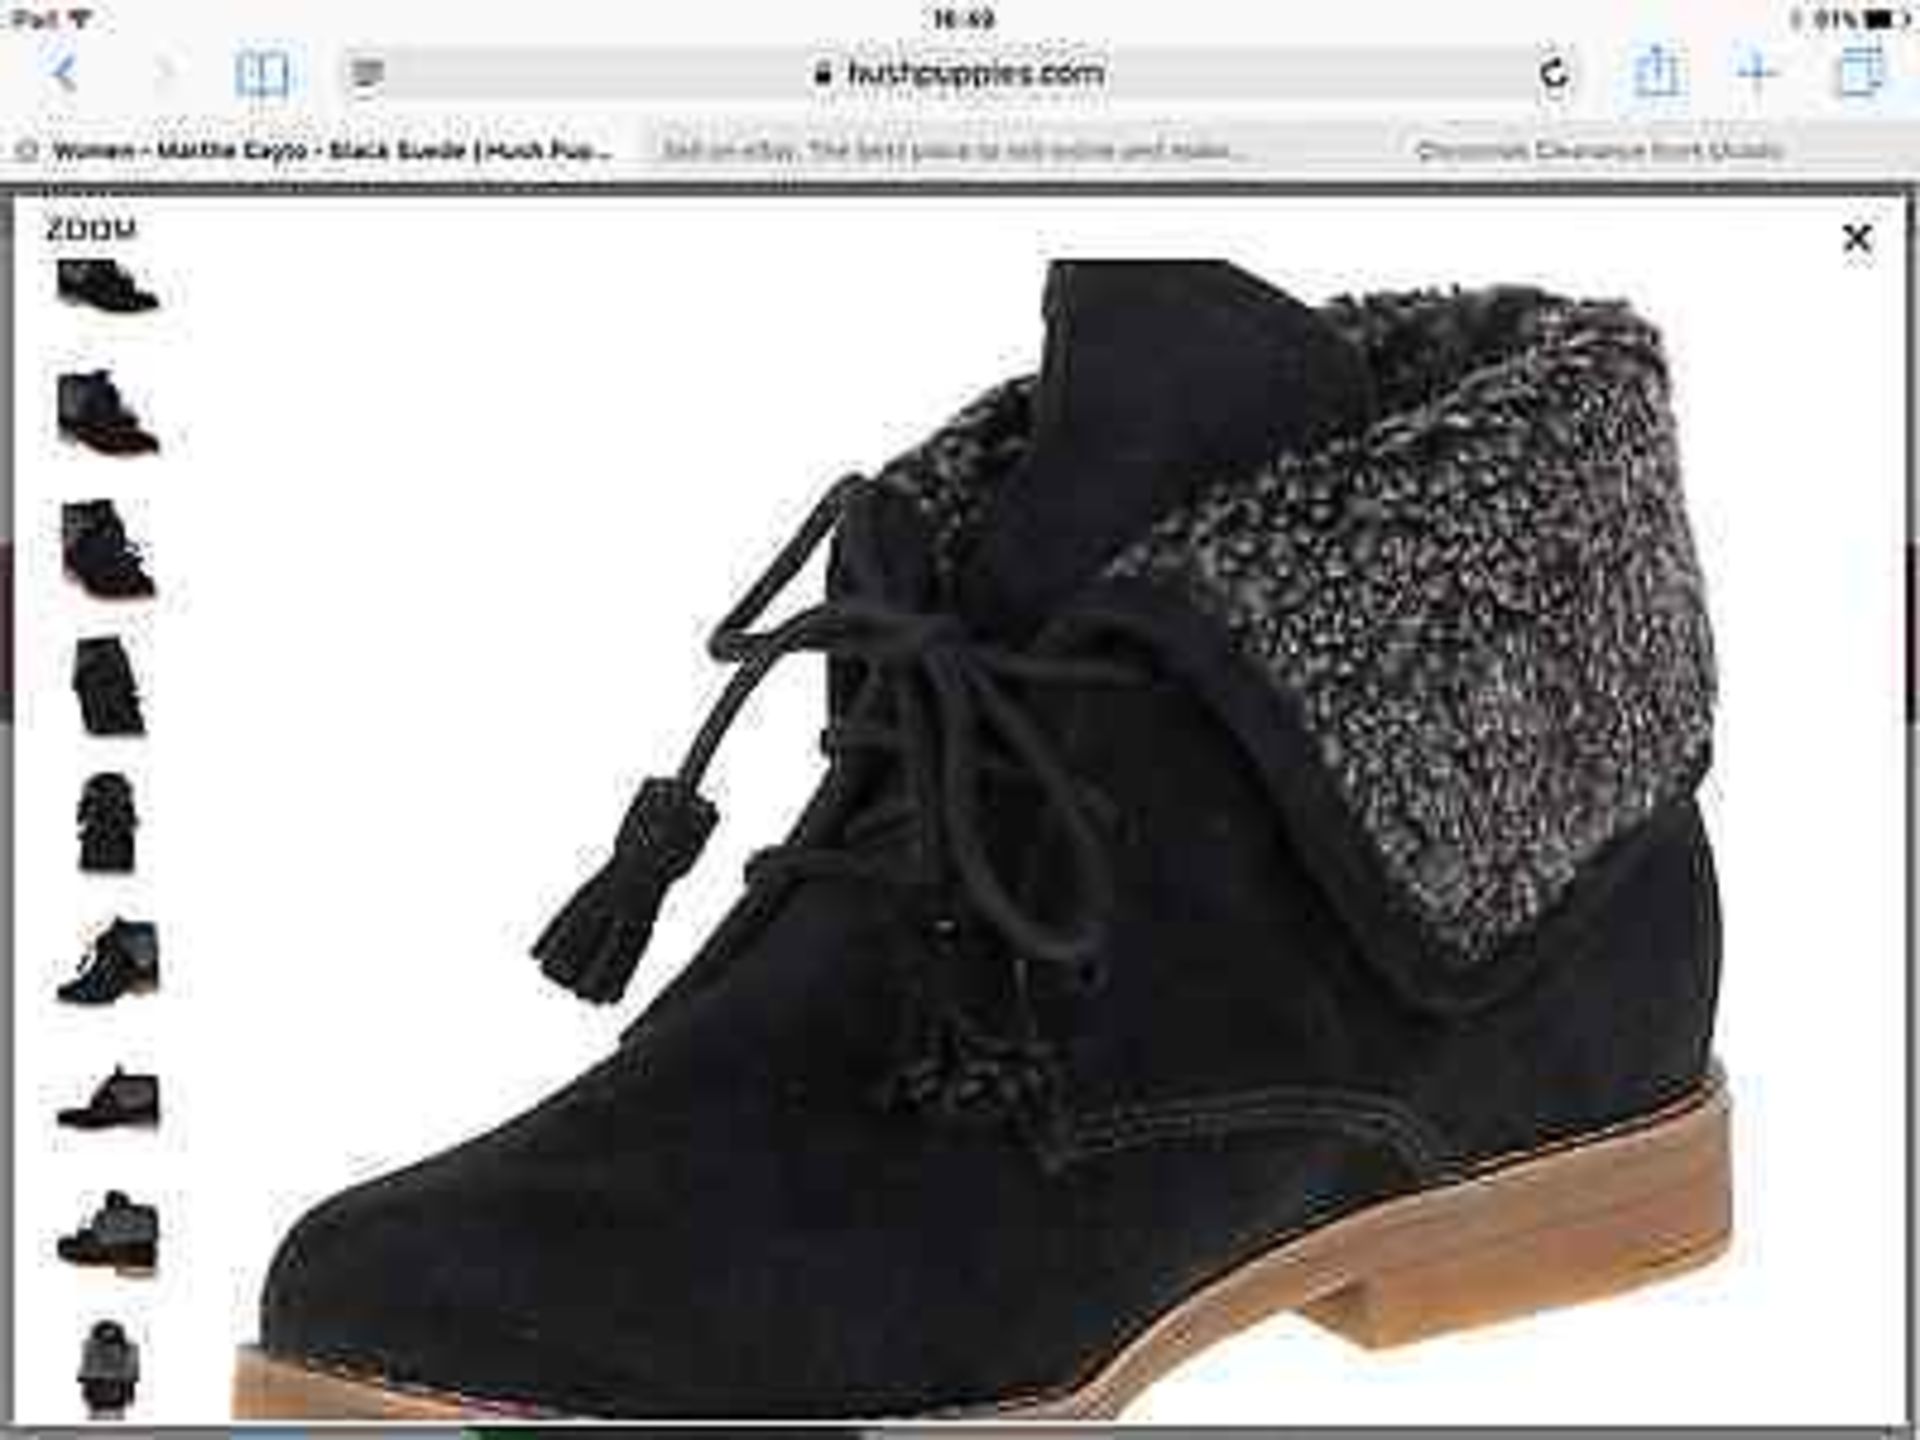 Hush Puppies Black Suede Martha Cayto Ankle Boot, Size UK 7, RRP £100 (New with box) [Ref: ] - Image 7 of 12